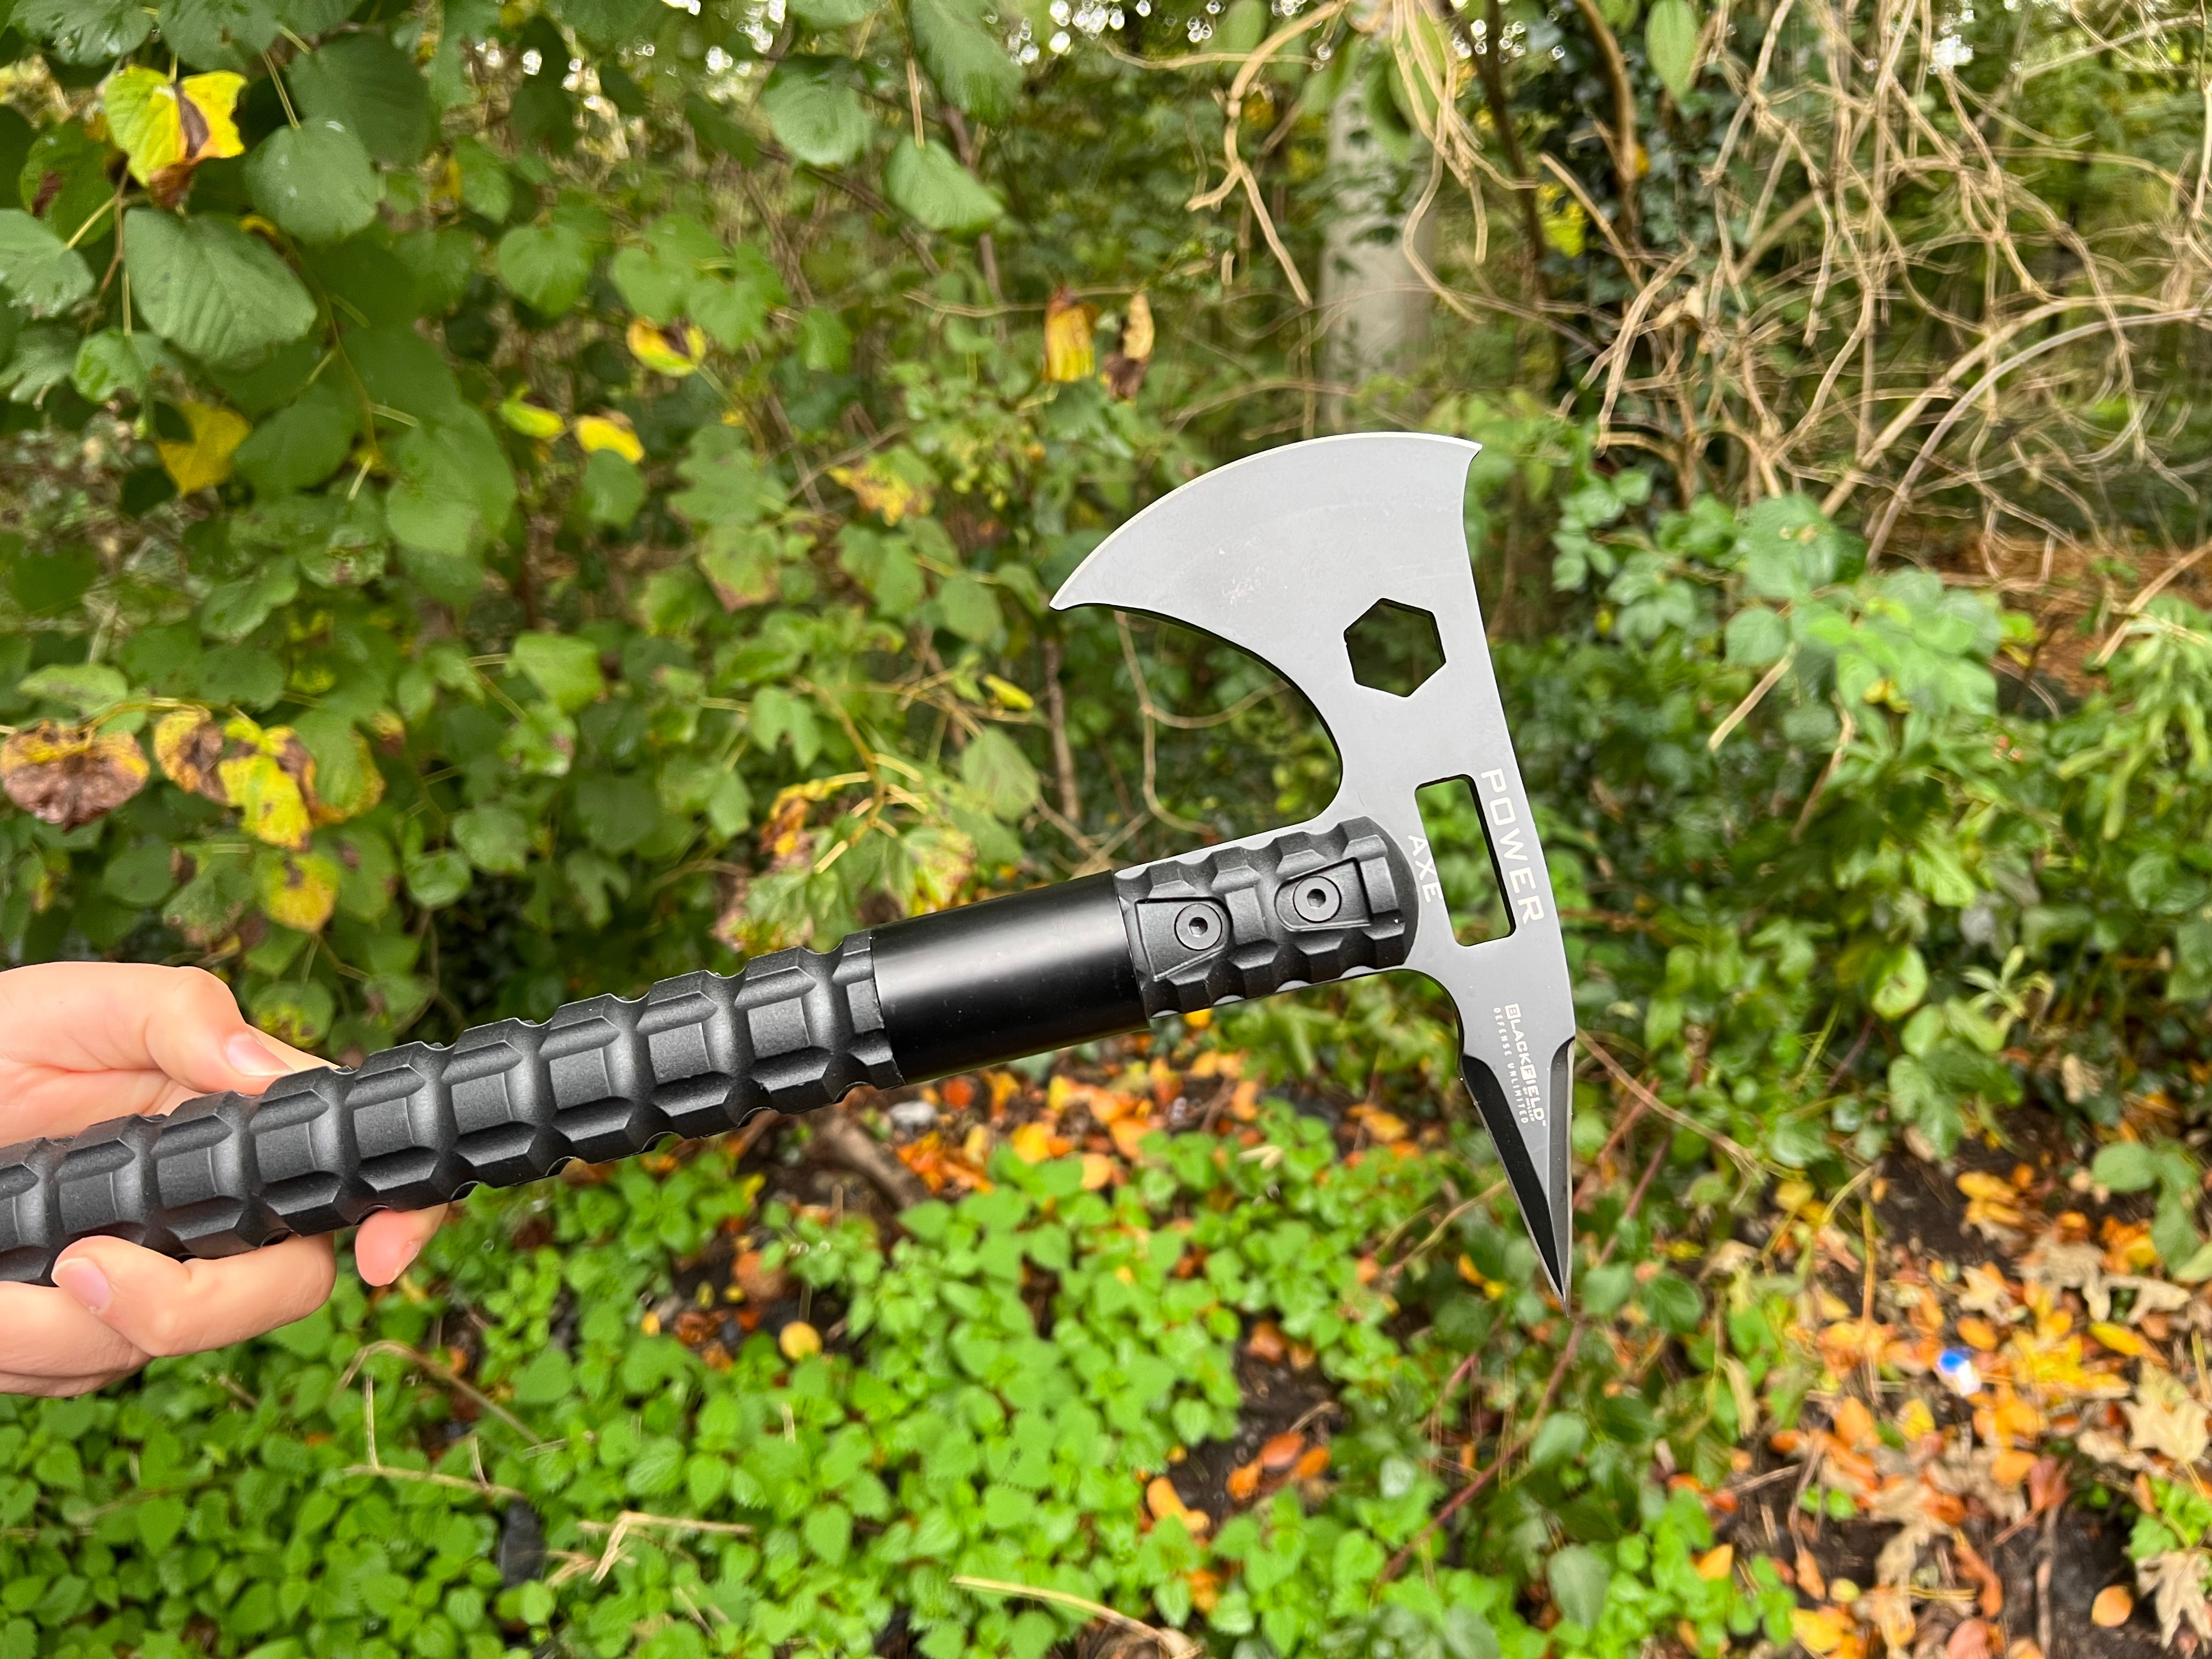 Blackfield Tactical Axe Survival Axe with Integrated Compass and Survival Kit